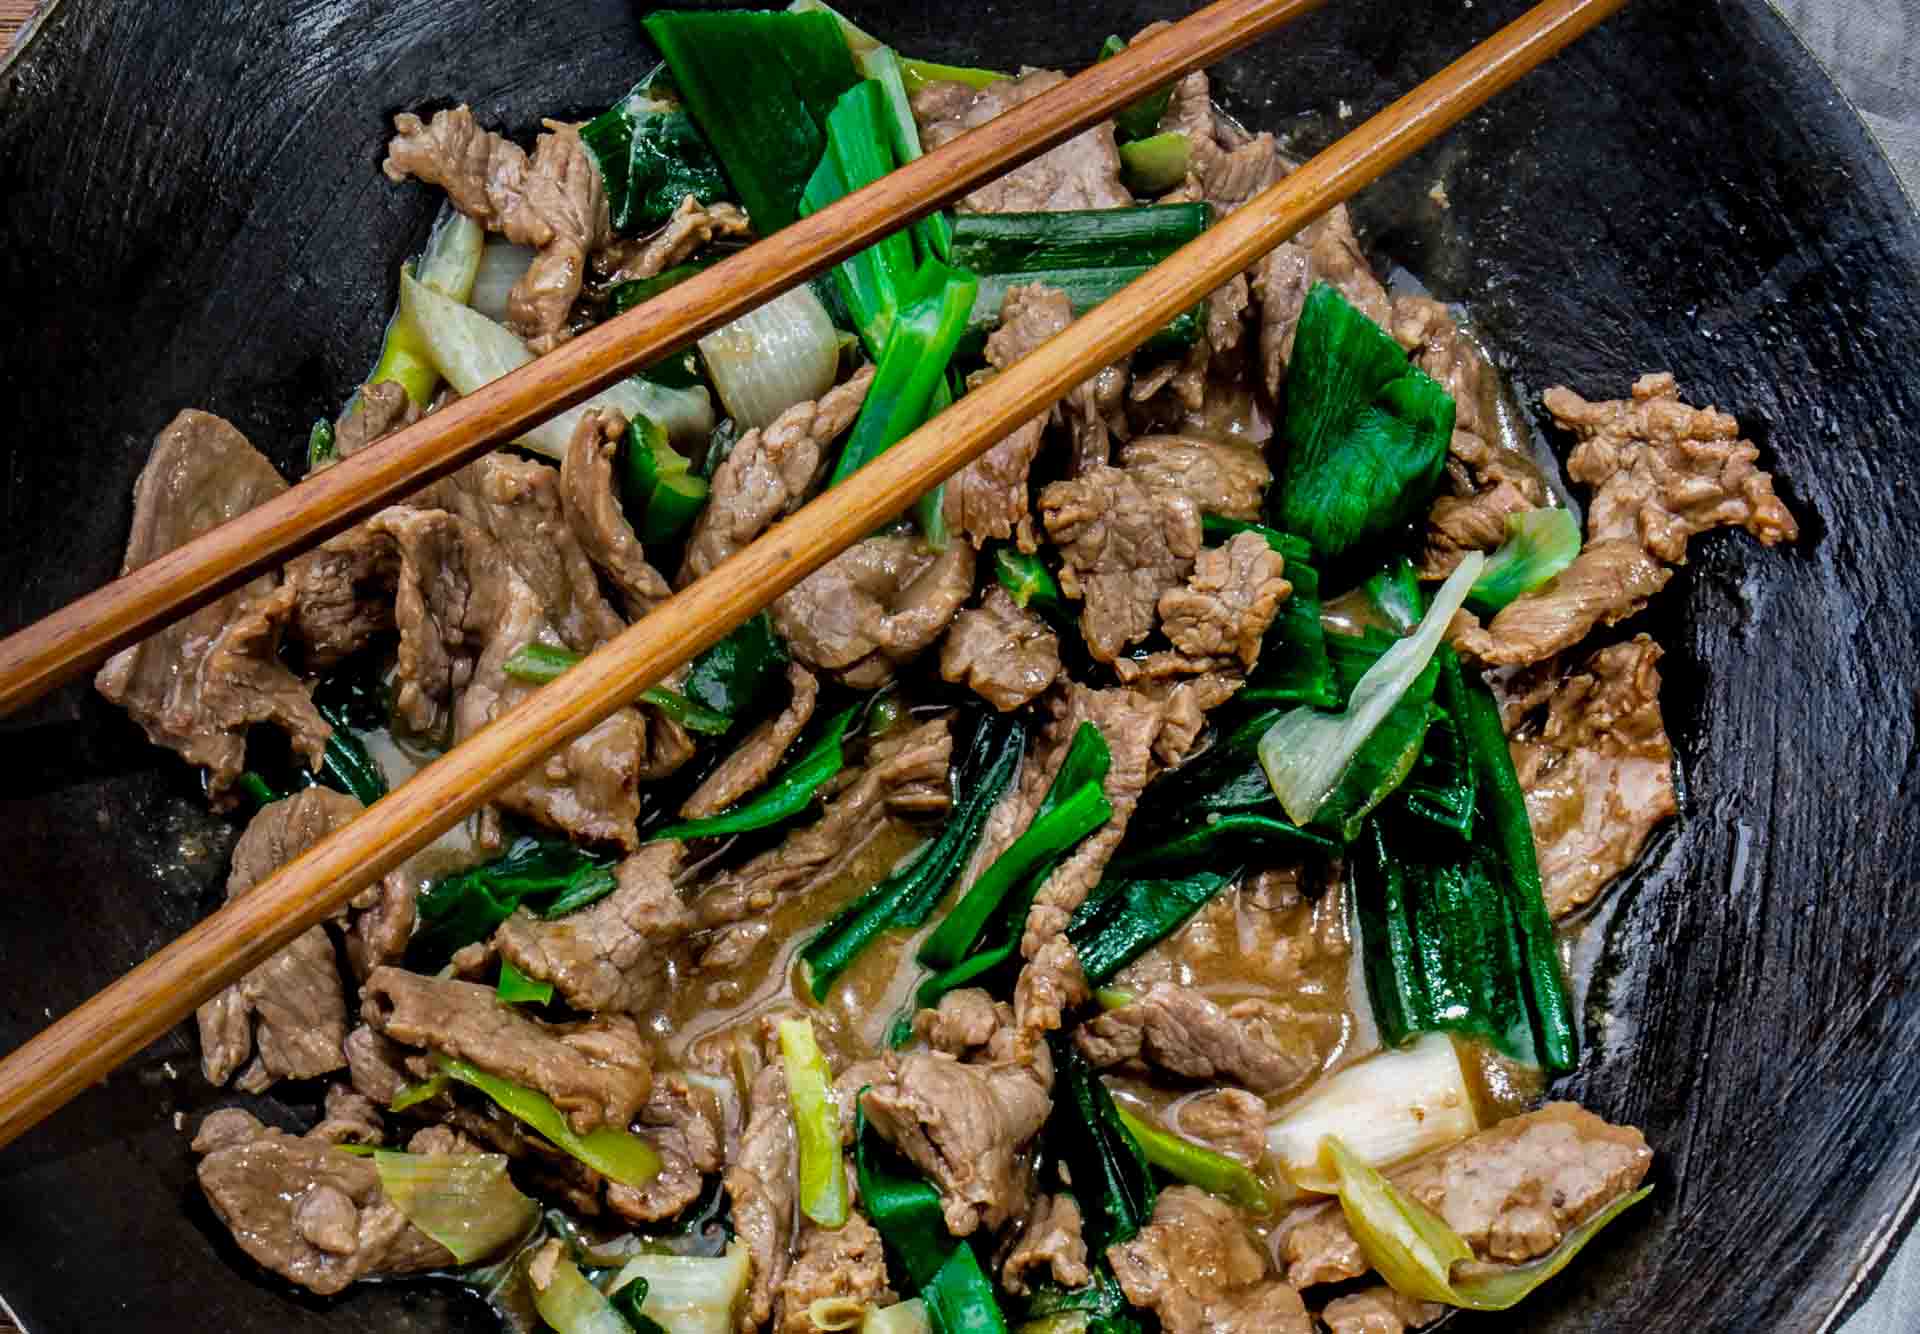 How to Prepare for Beef Stir-Fry